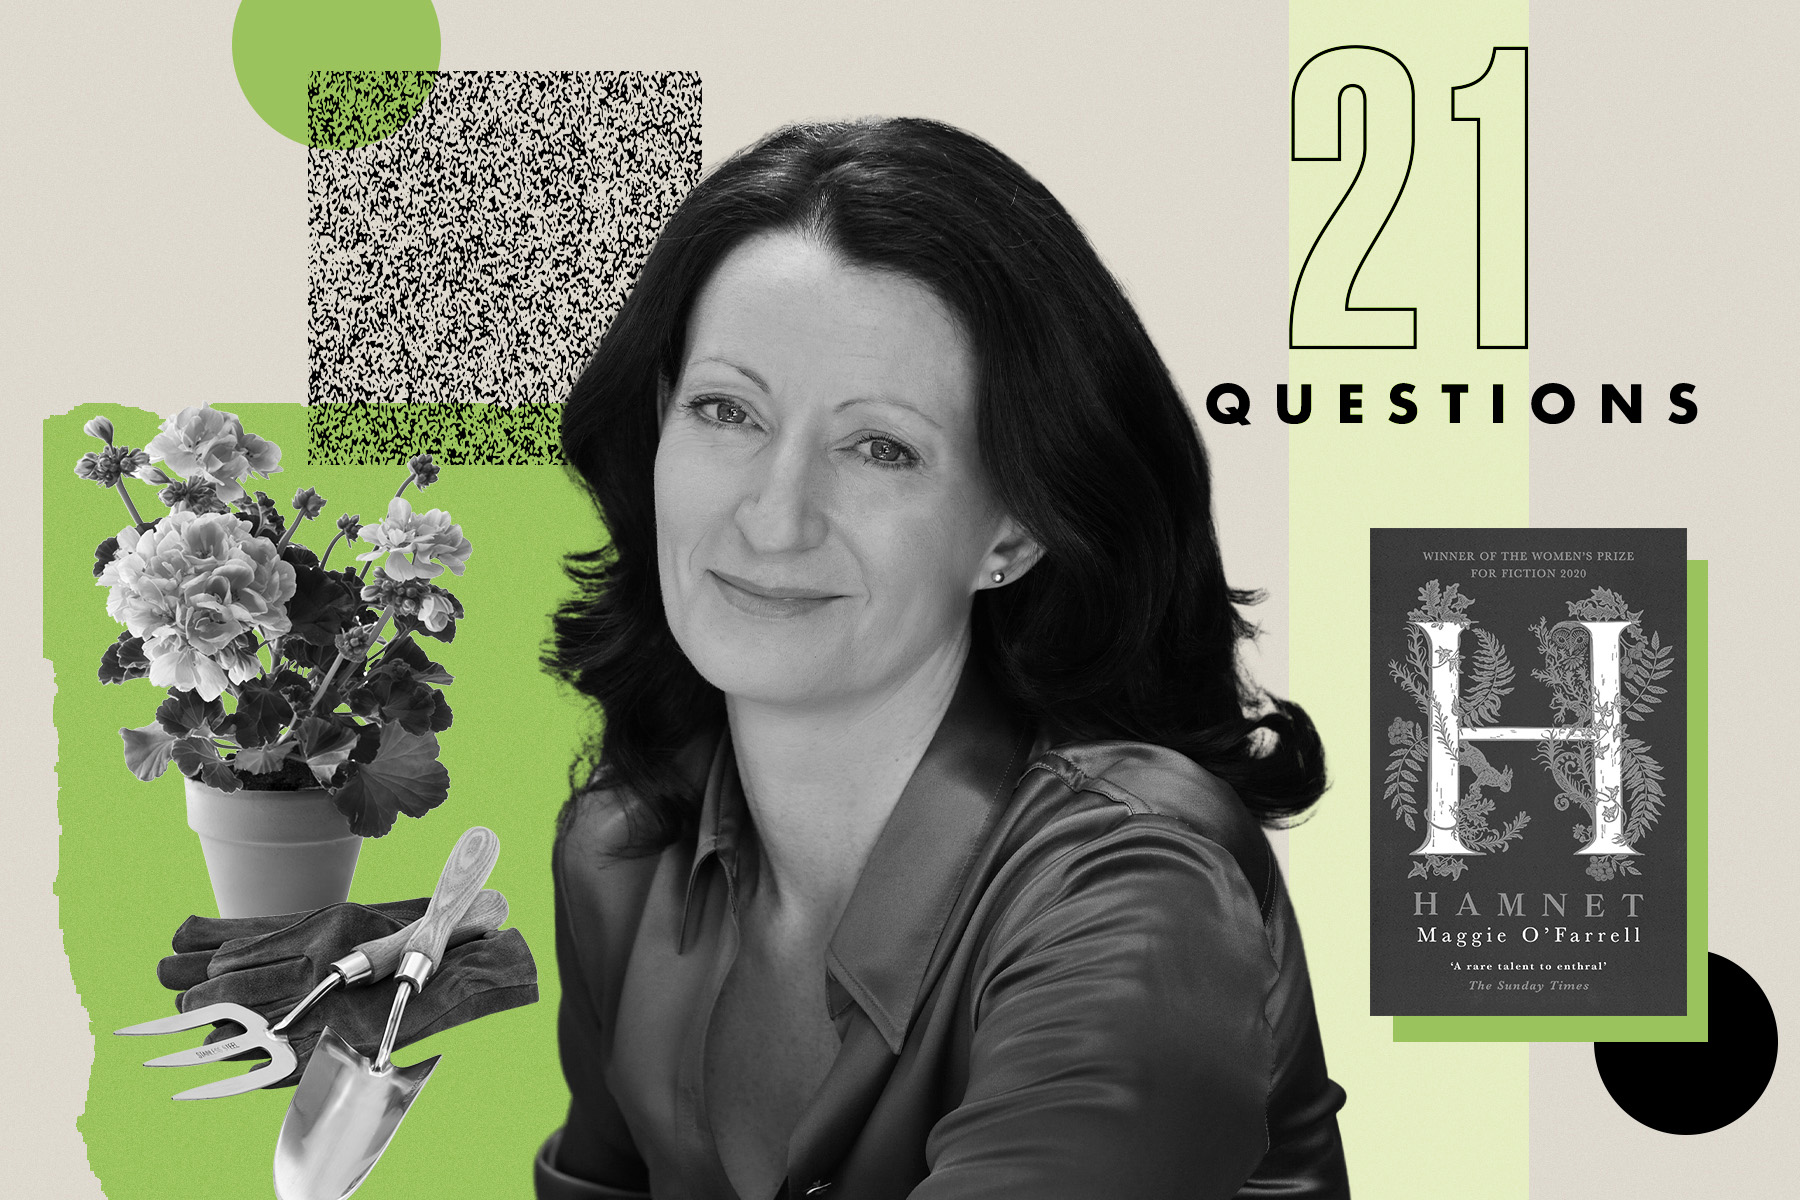 A photo of Kathleen MacMahon in black and white against a green-tinged background, alongside a flower, a copy of the book 'Hamnet' and the words "21 questions" in the top right hand corner